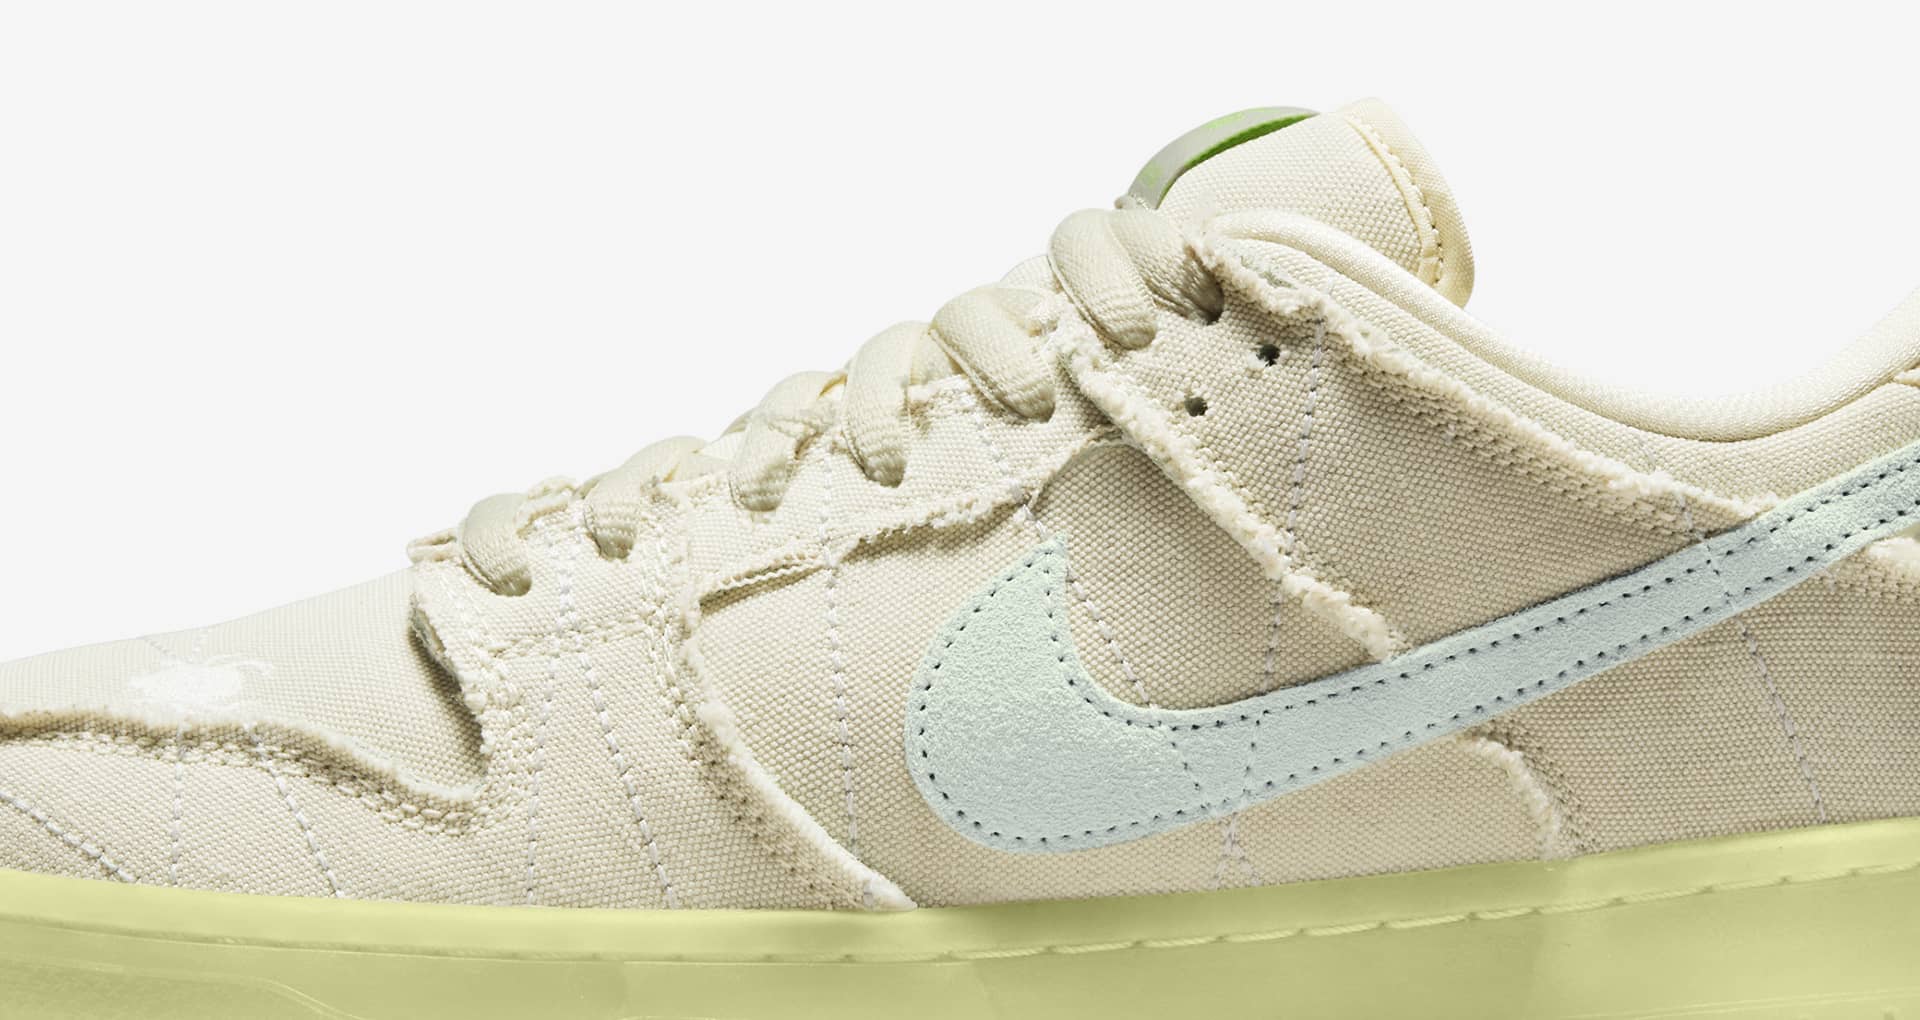 SB Dunk Low 'Mummy' (DM0774-111) Release Date. Nike SNKRS MY